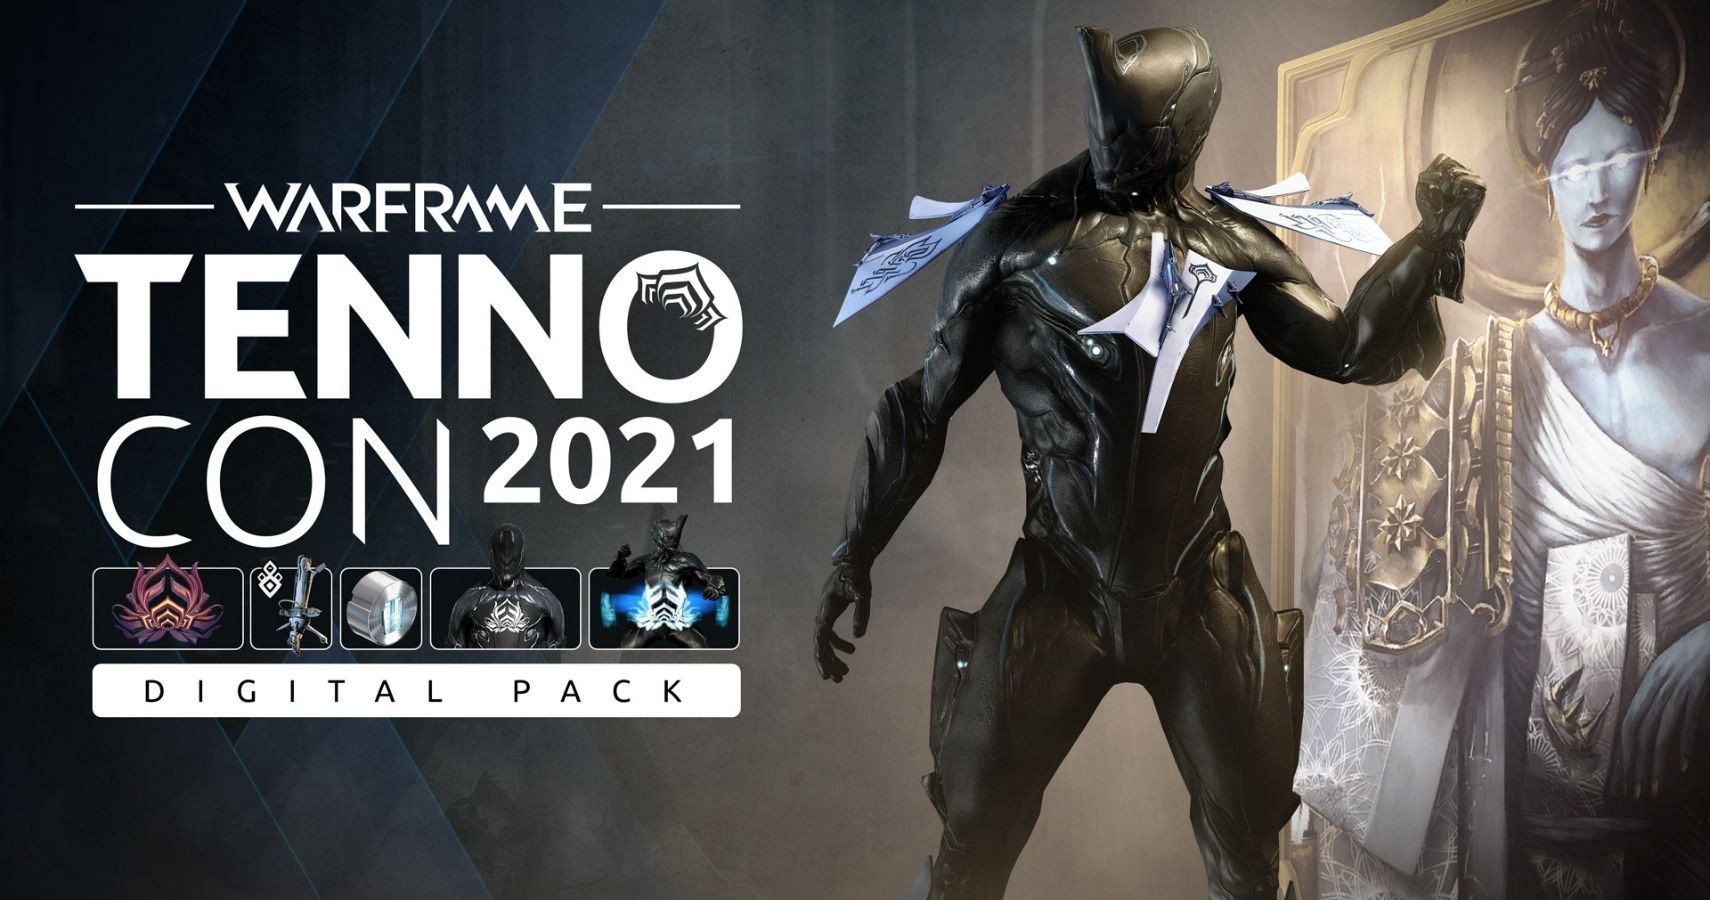 Warframe TennoCon 2021 Date, Details, And More